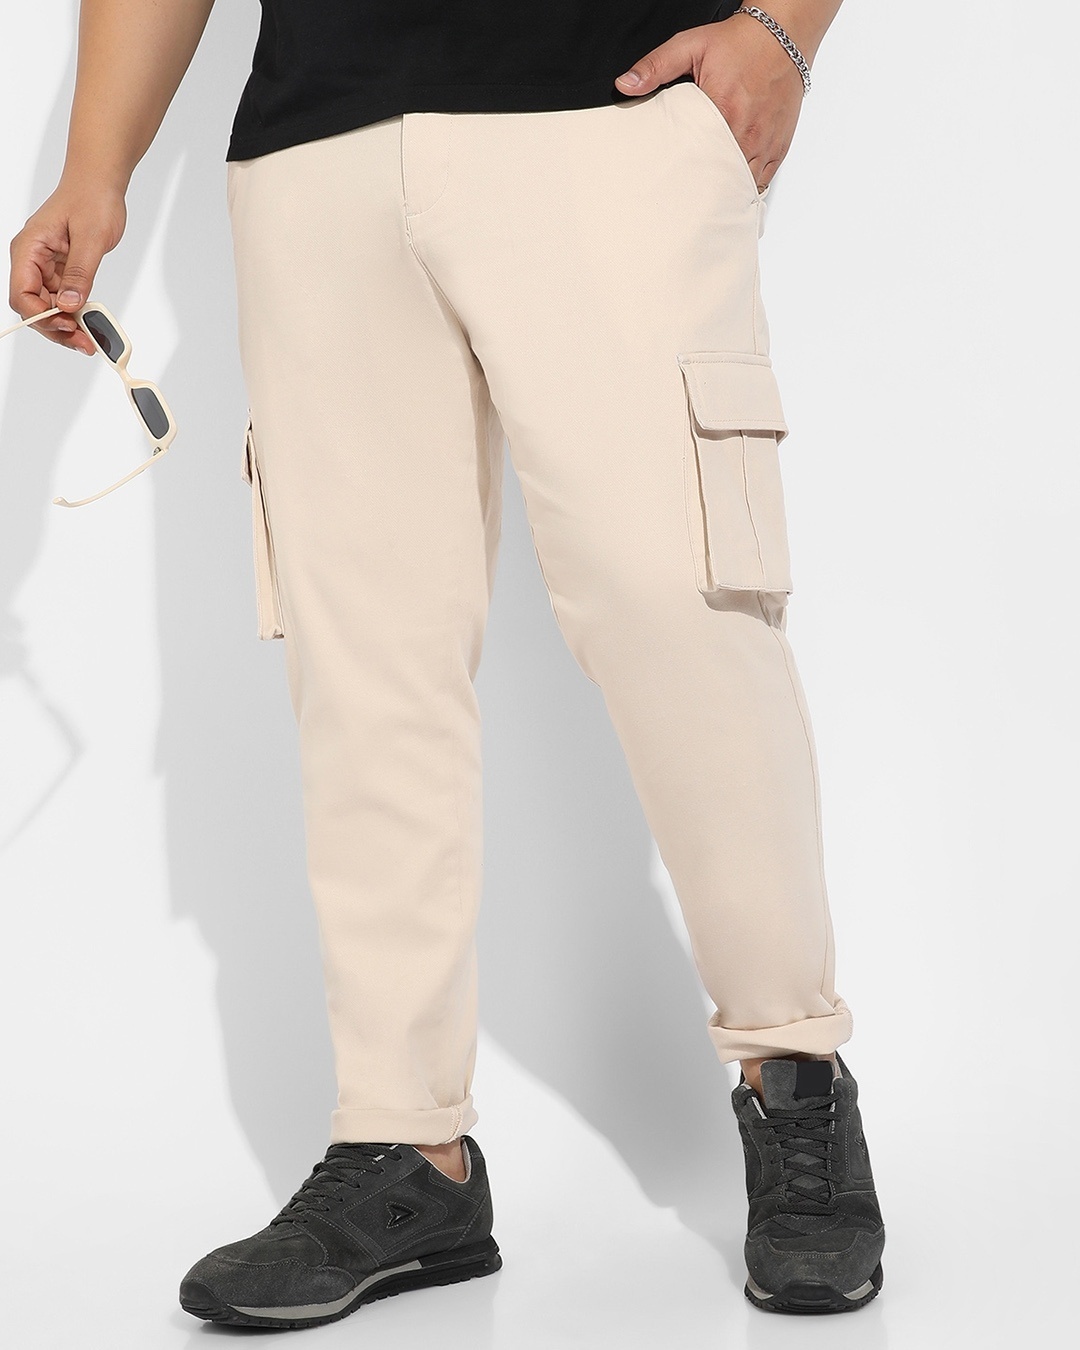 Cargo Trousers and Pants for Hiking and Travelling I Khaki – Tripole Gears